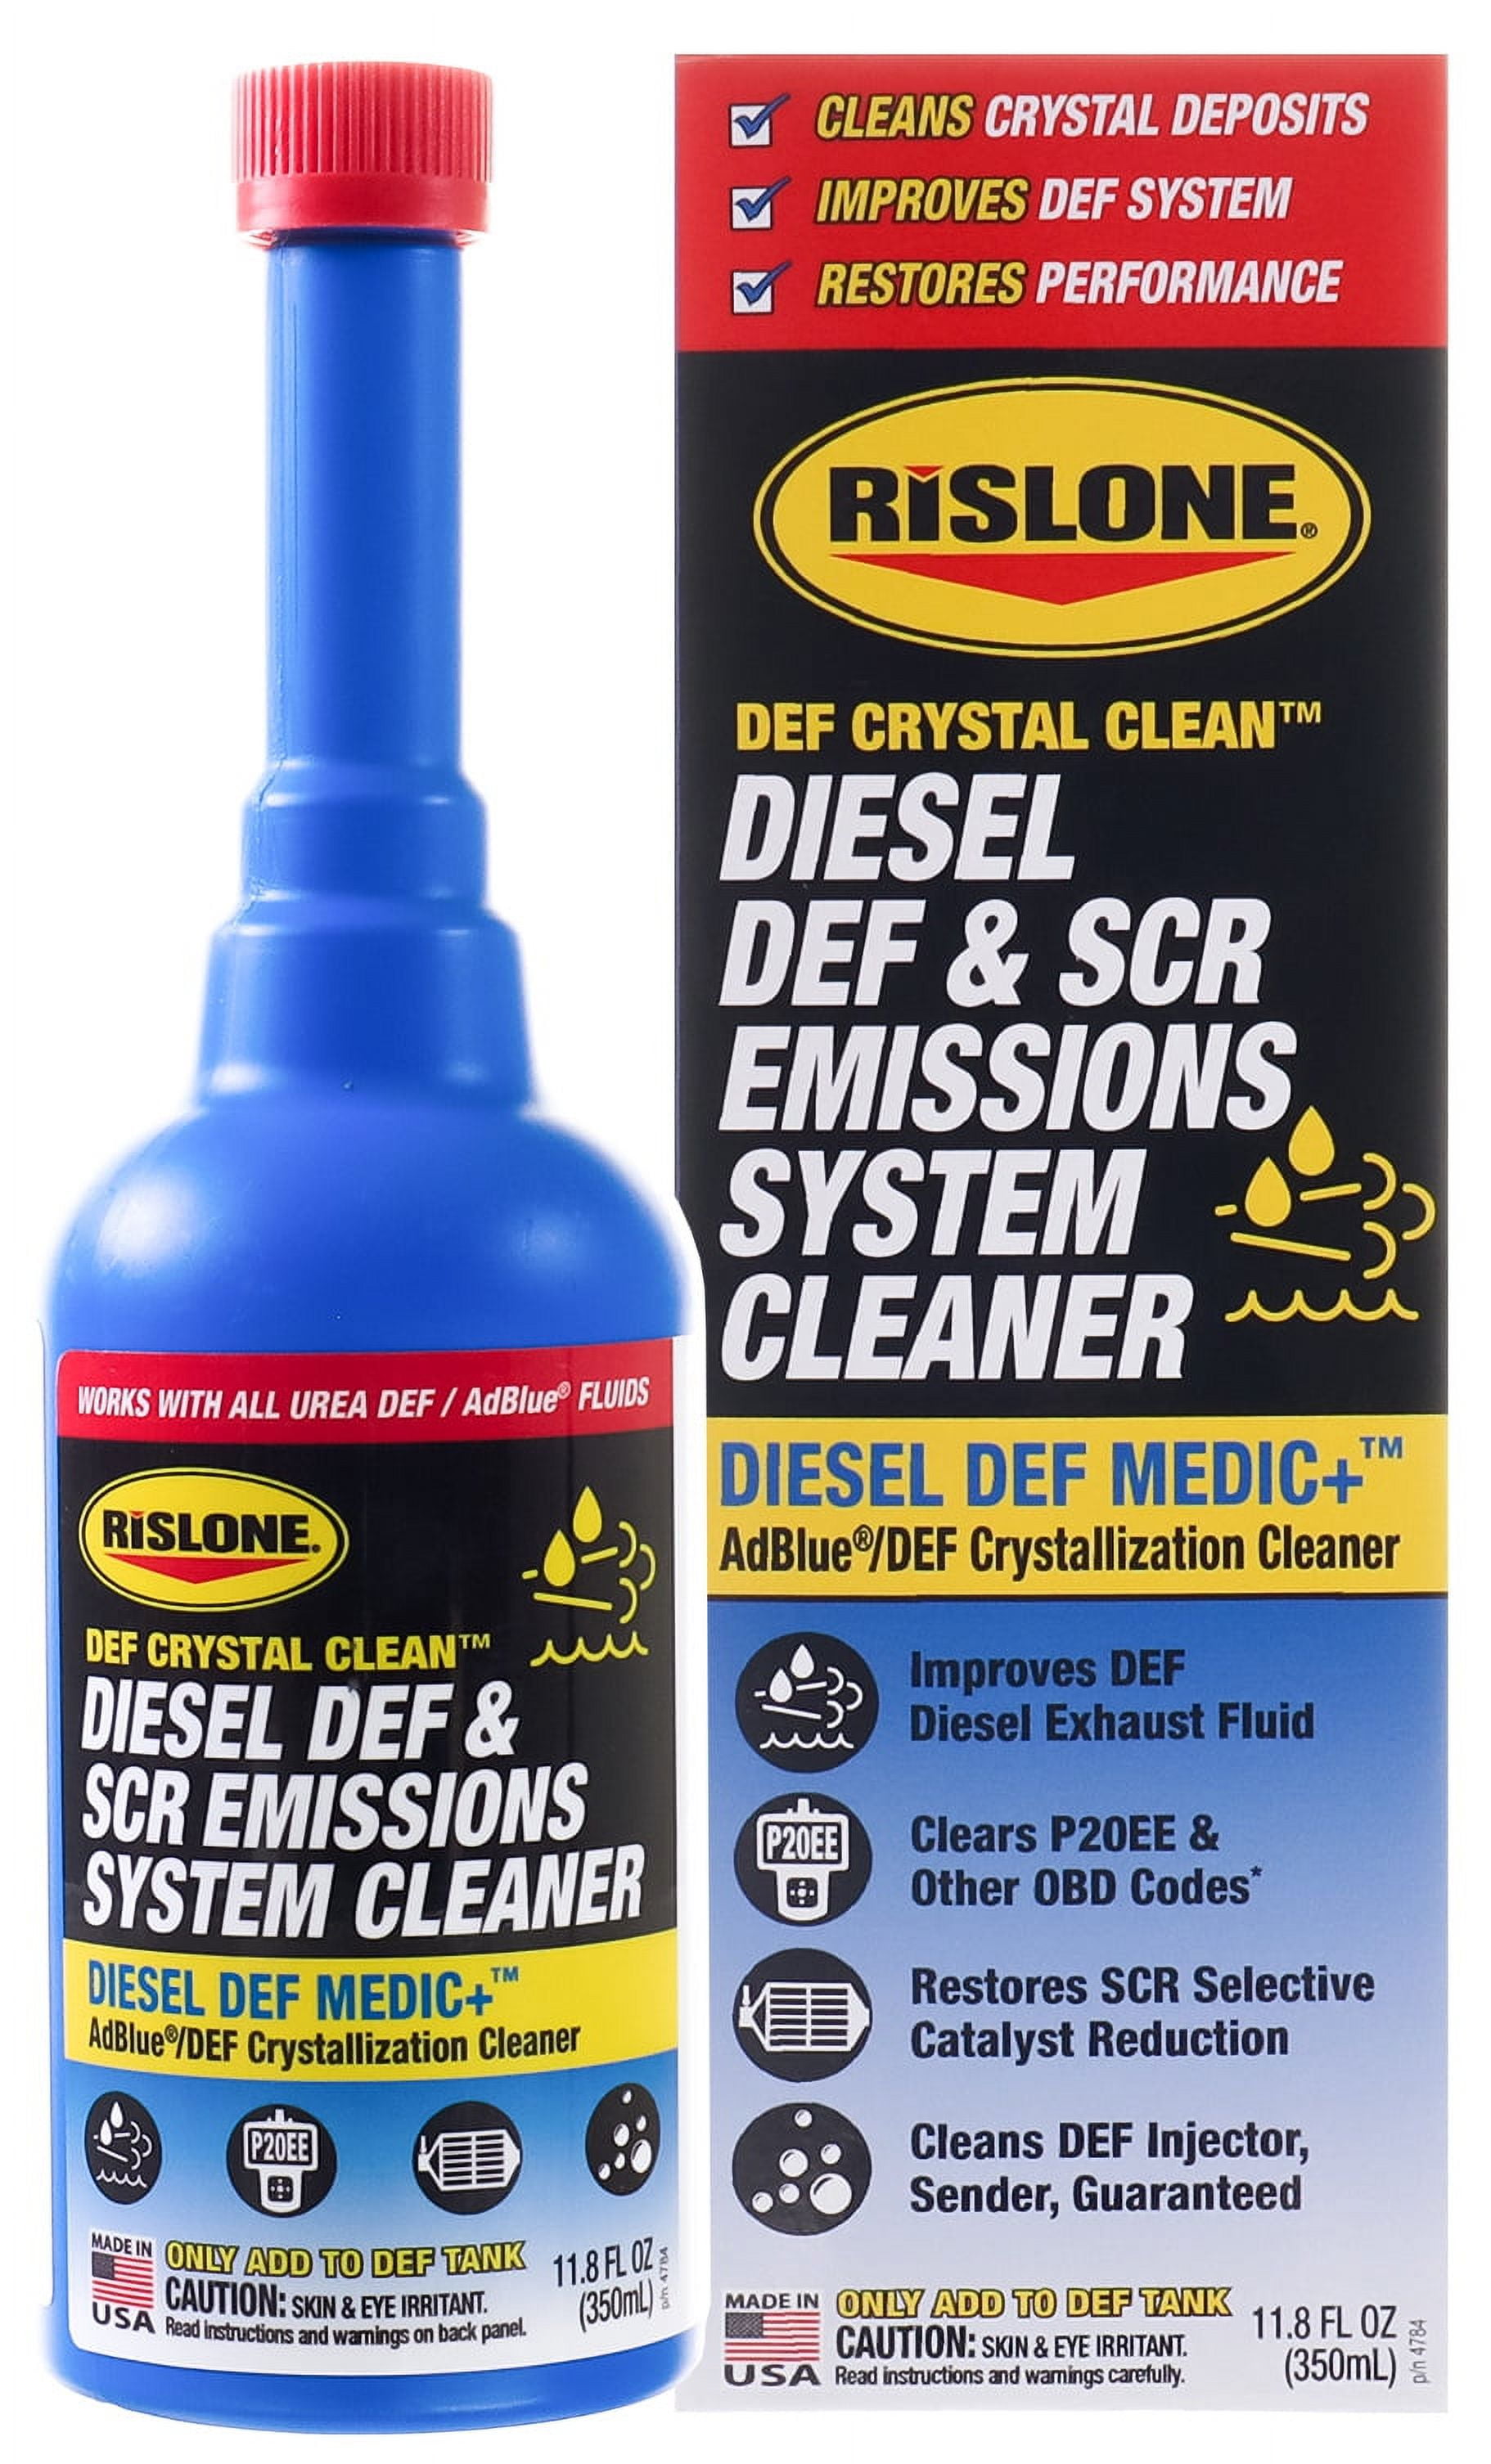  Liqui Moly Truck Series Complete Diesel System Cleaner